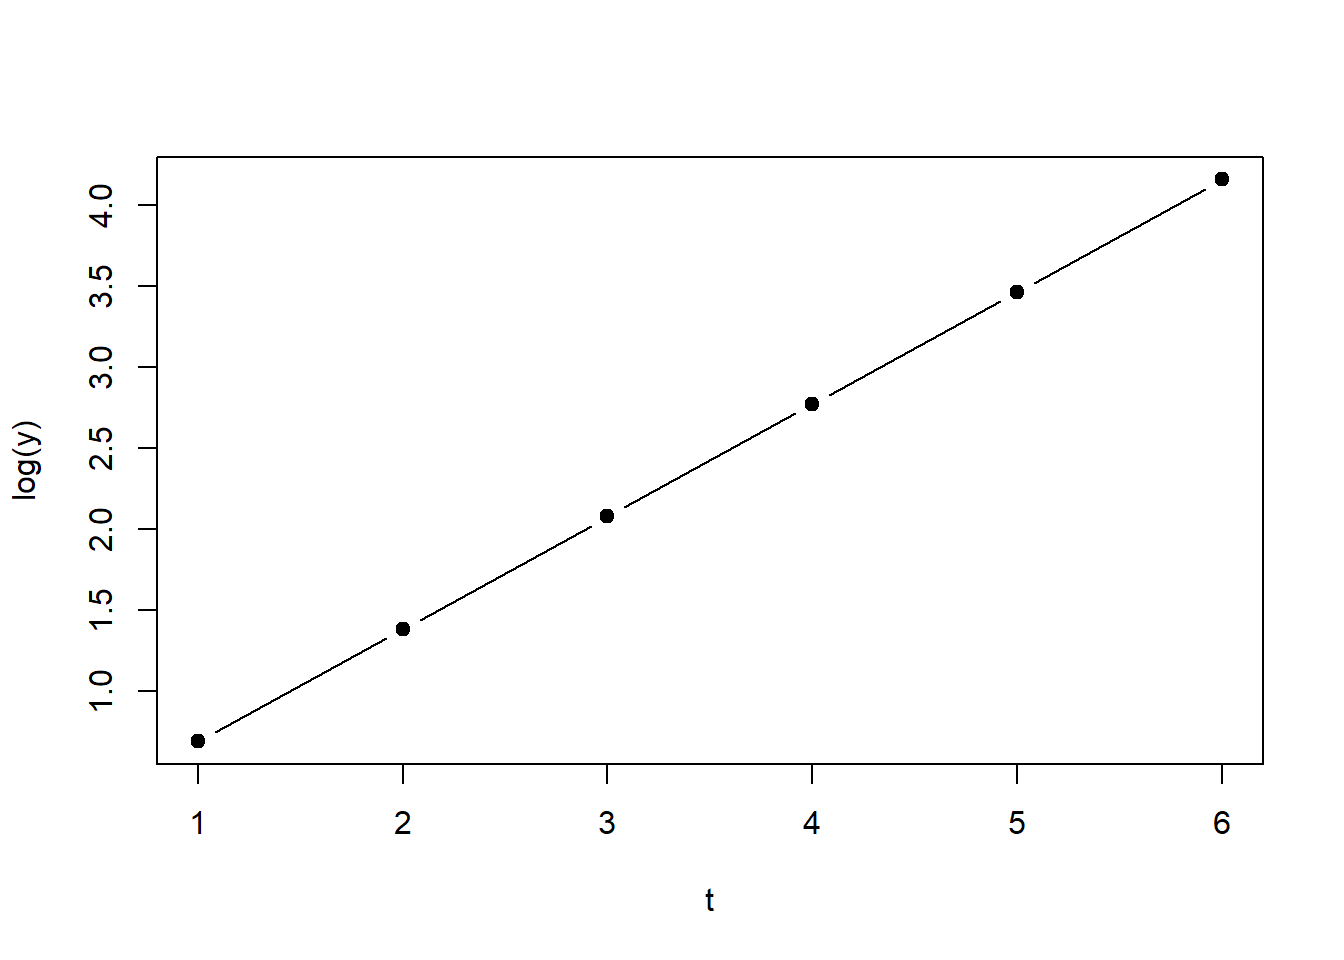 Left: Plot of Equation 2.1. Right: Plot of Equation 2.1 on logarithmic scale.